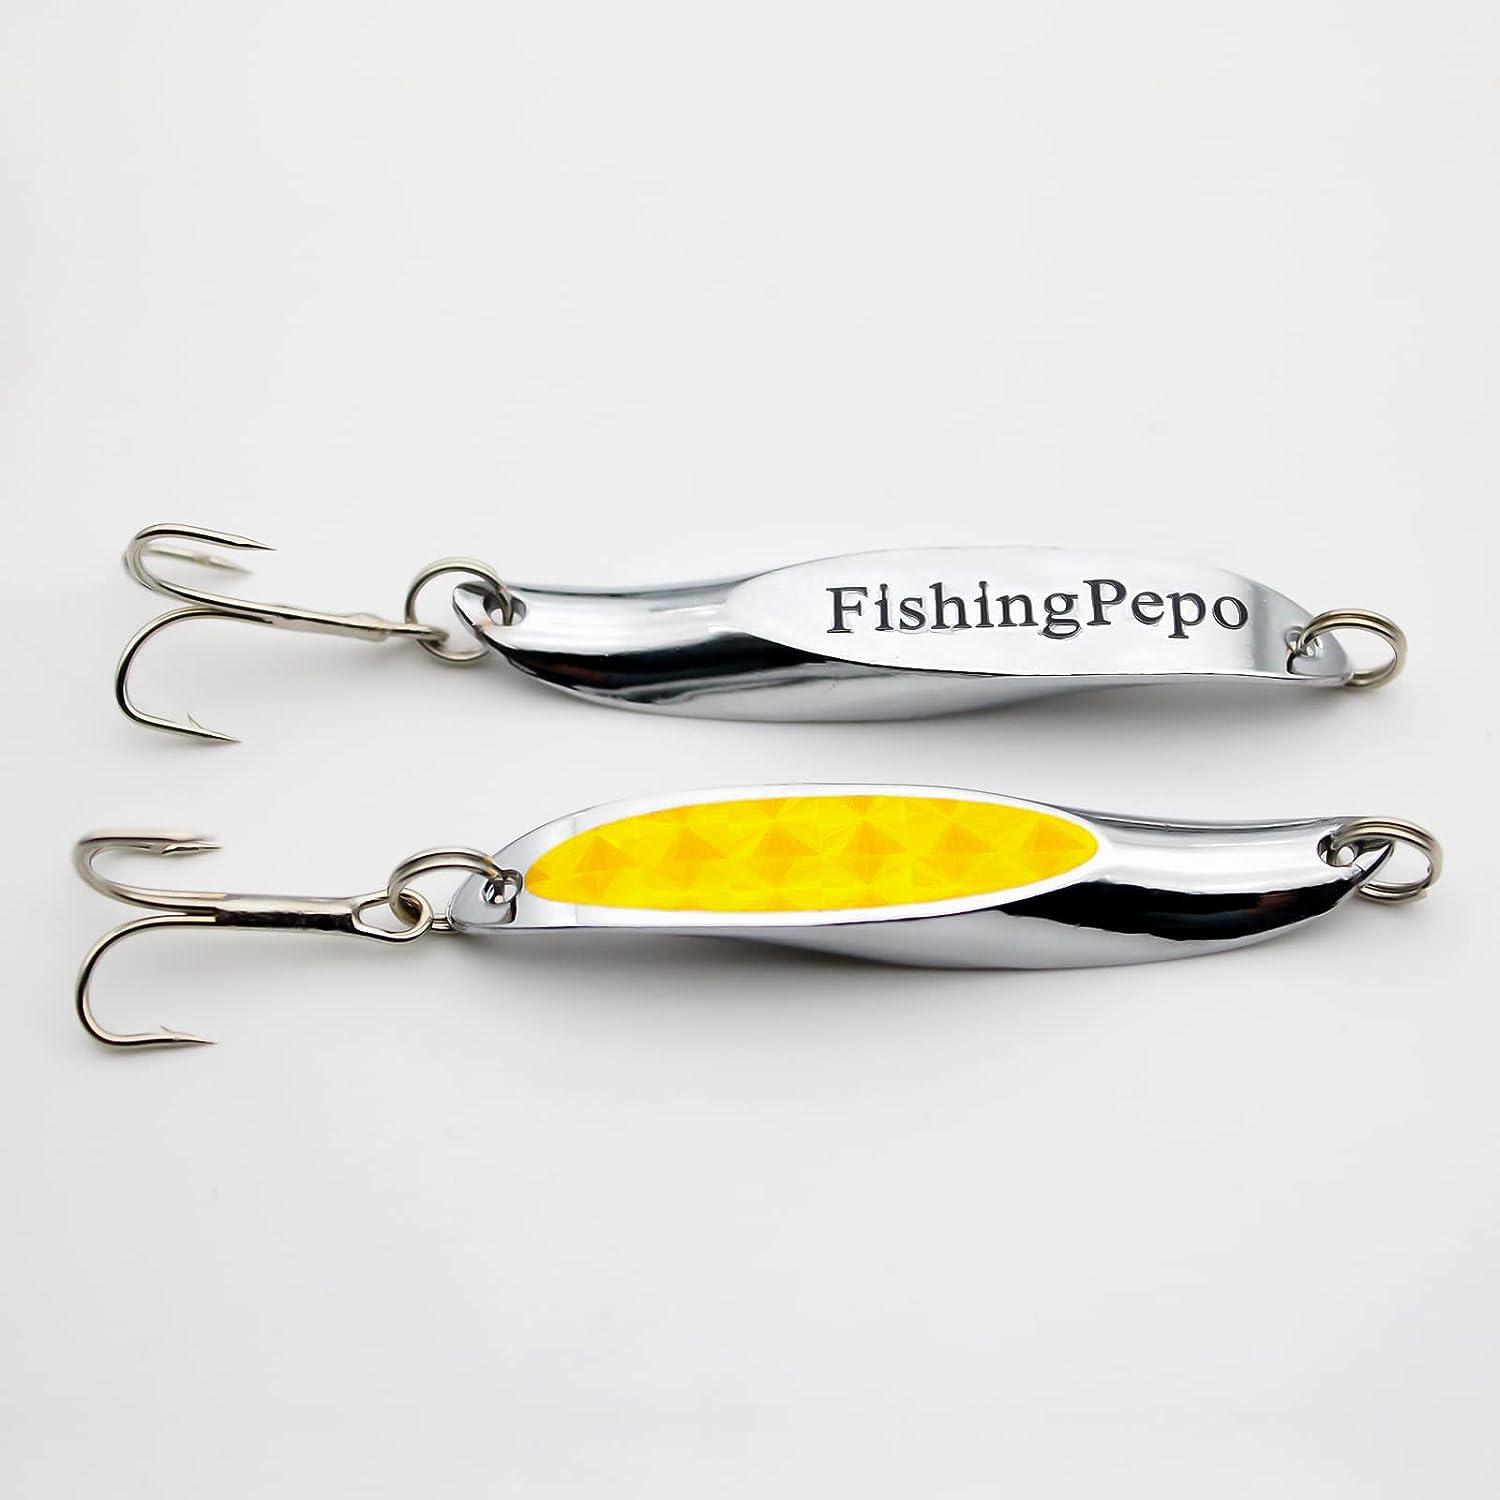 FishingPepo Fishing Spoons Lure, Trout Lures, Bass Lures, Spinning Lures,Fishing  Spoons Hard Fishing Lures Treble